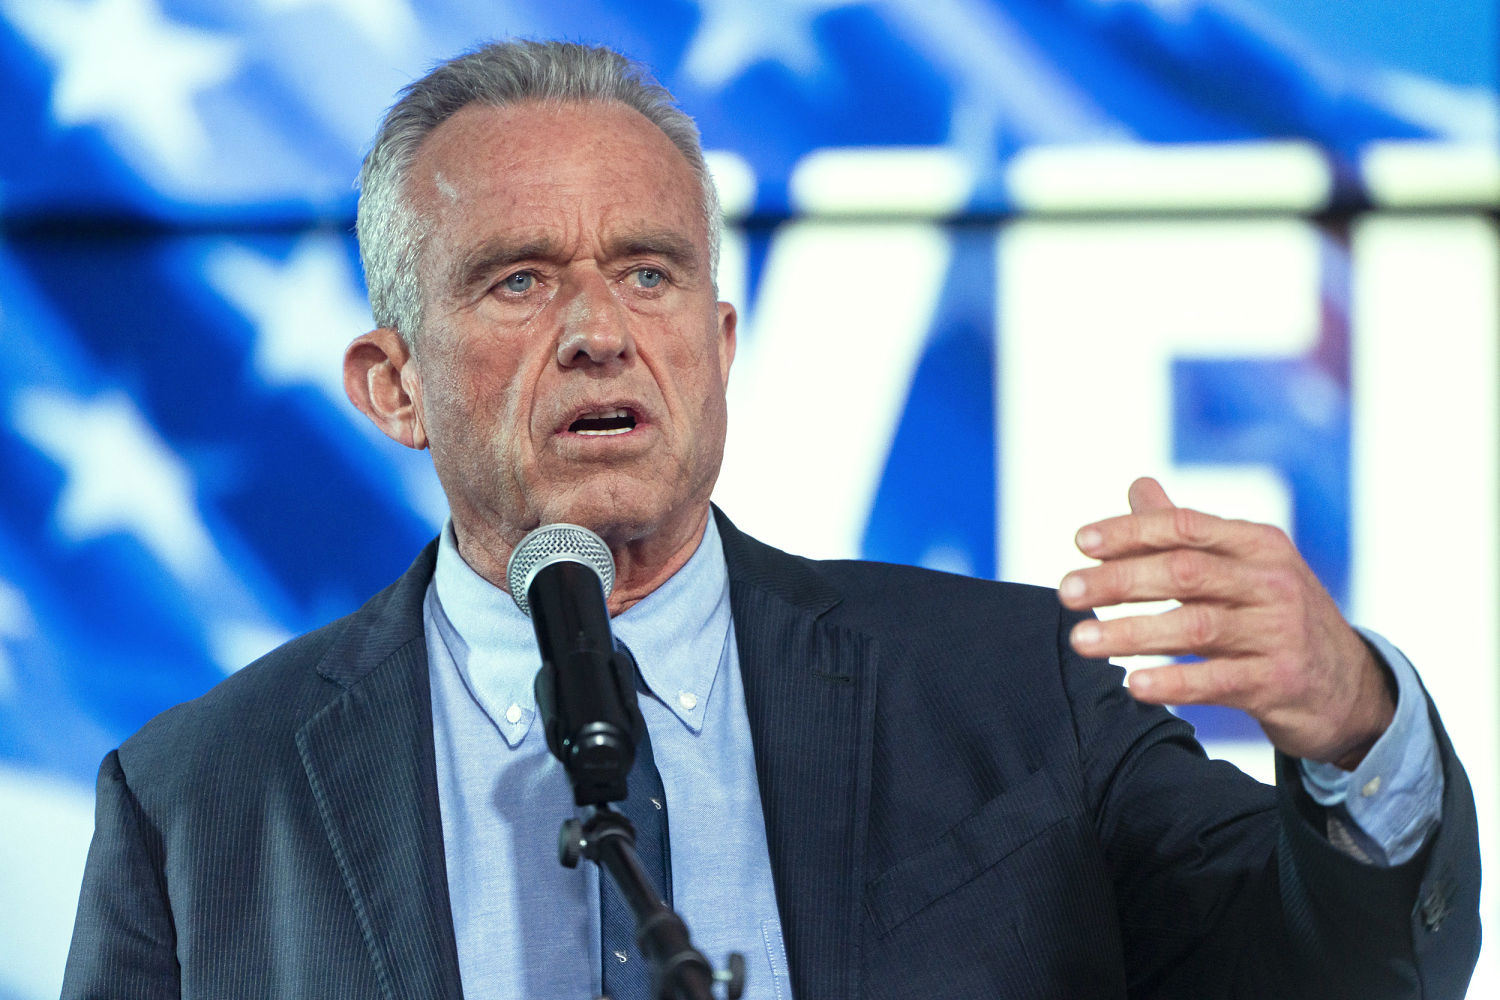 RFK Jr. sends a big signal he’s going to double down on his anti-vax roots